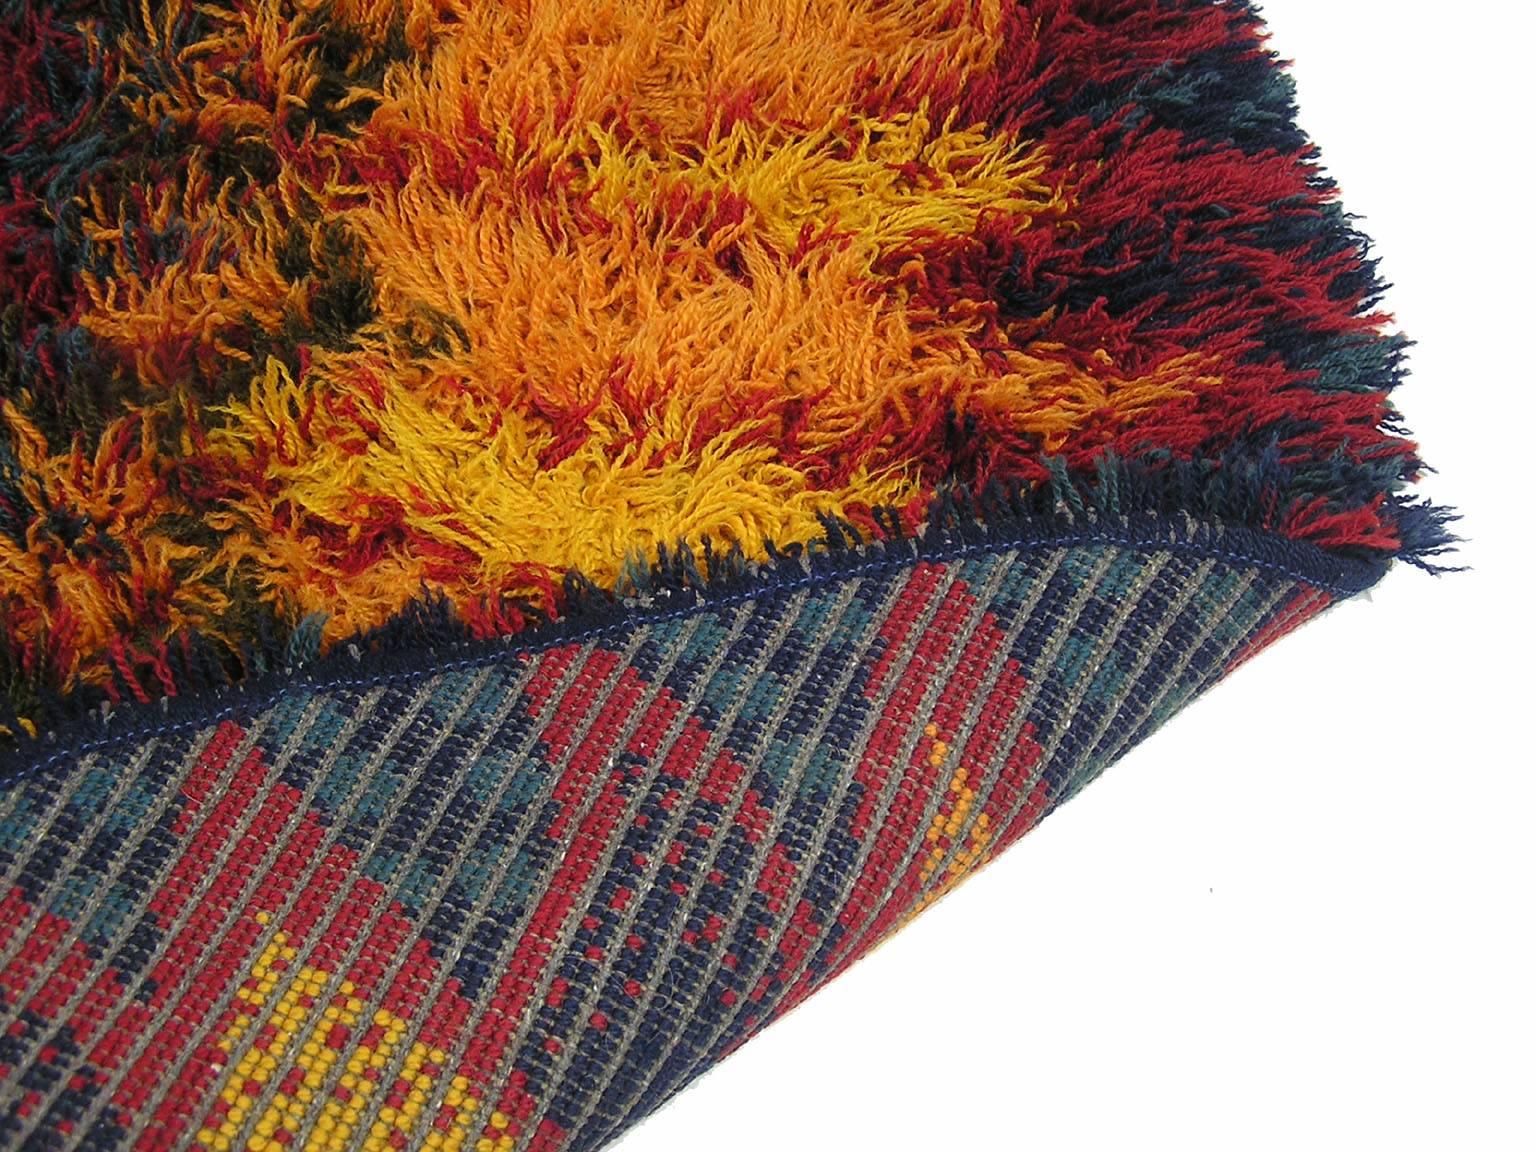 1970s style rugs